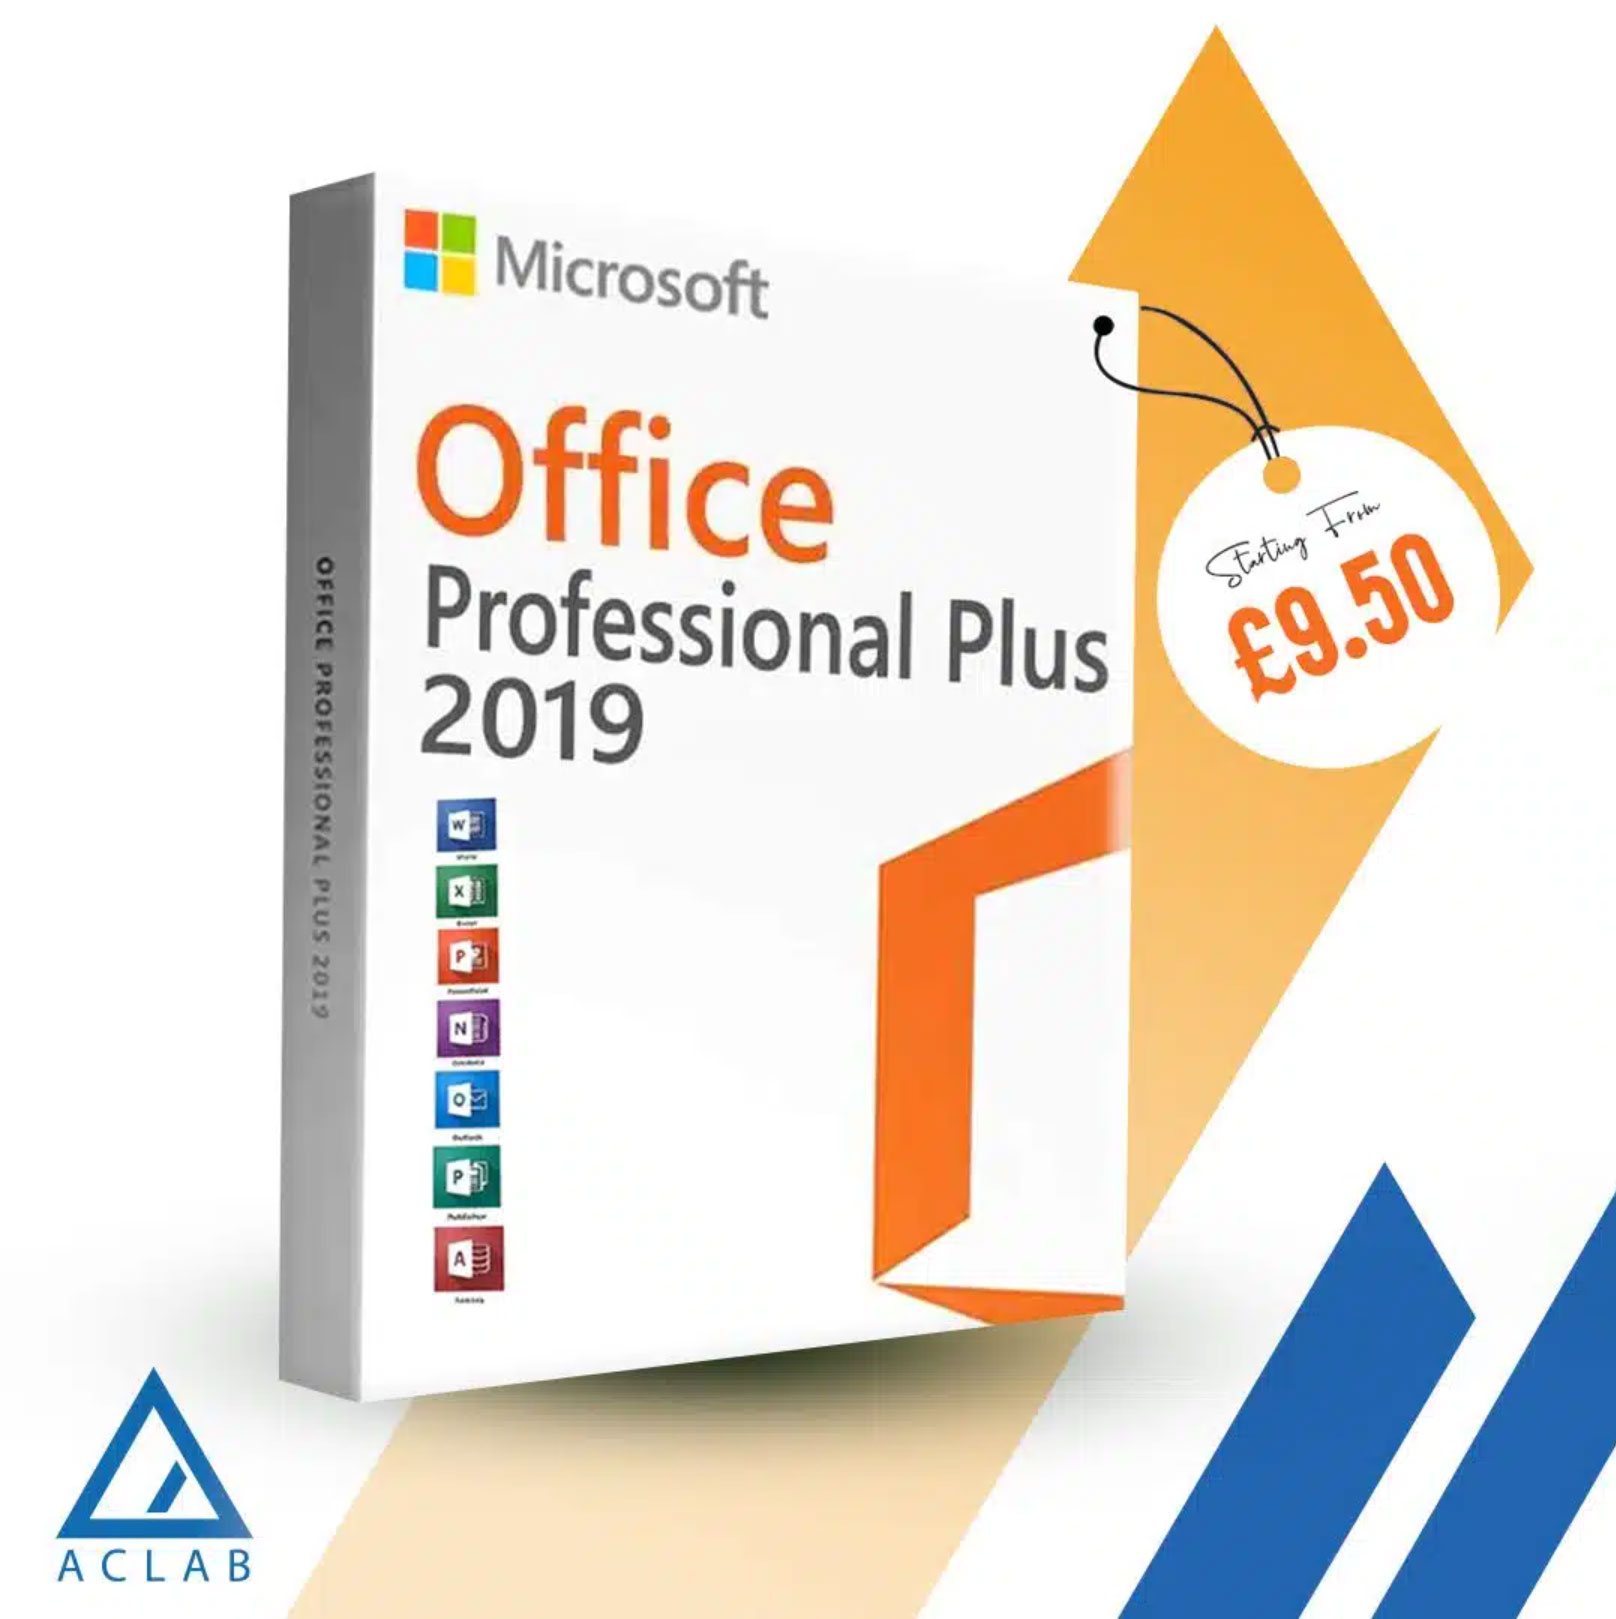 Microsoft Office 2019 Professional Plus – Only For Windows